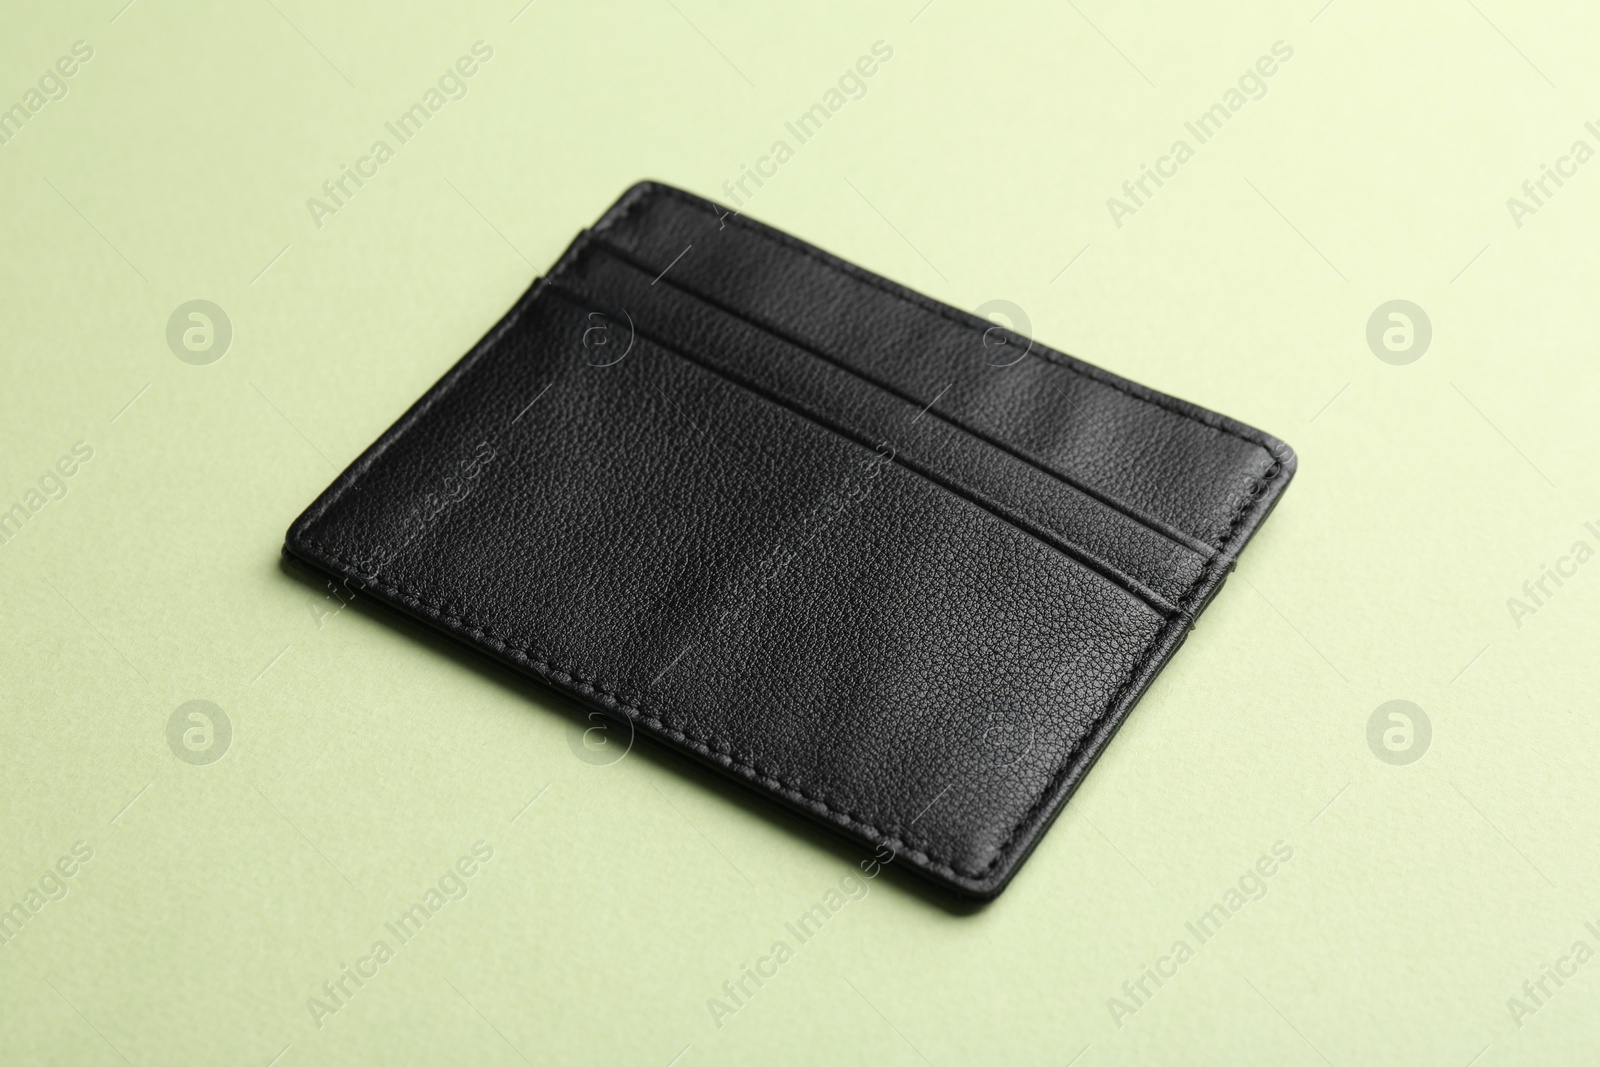 Photo of Empty leather card holder on light green background